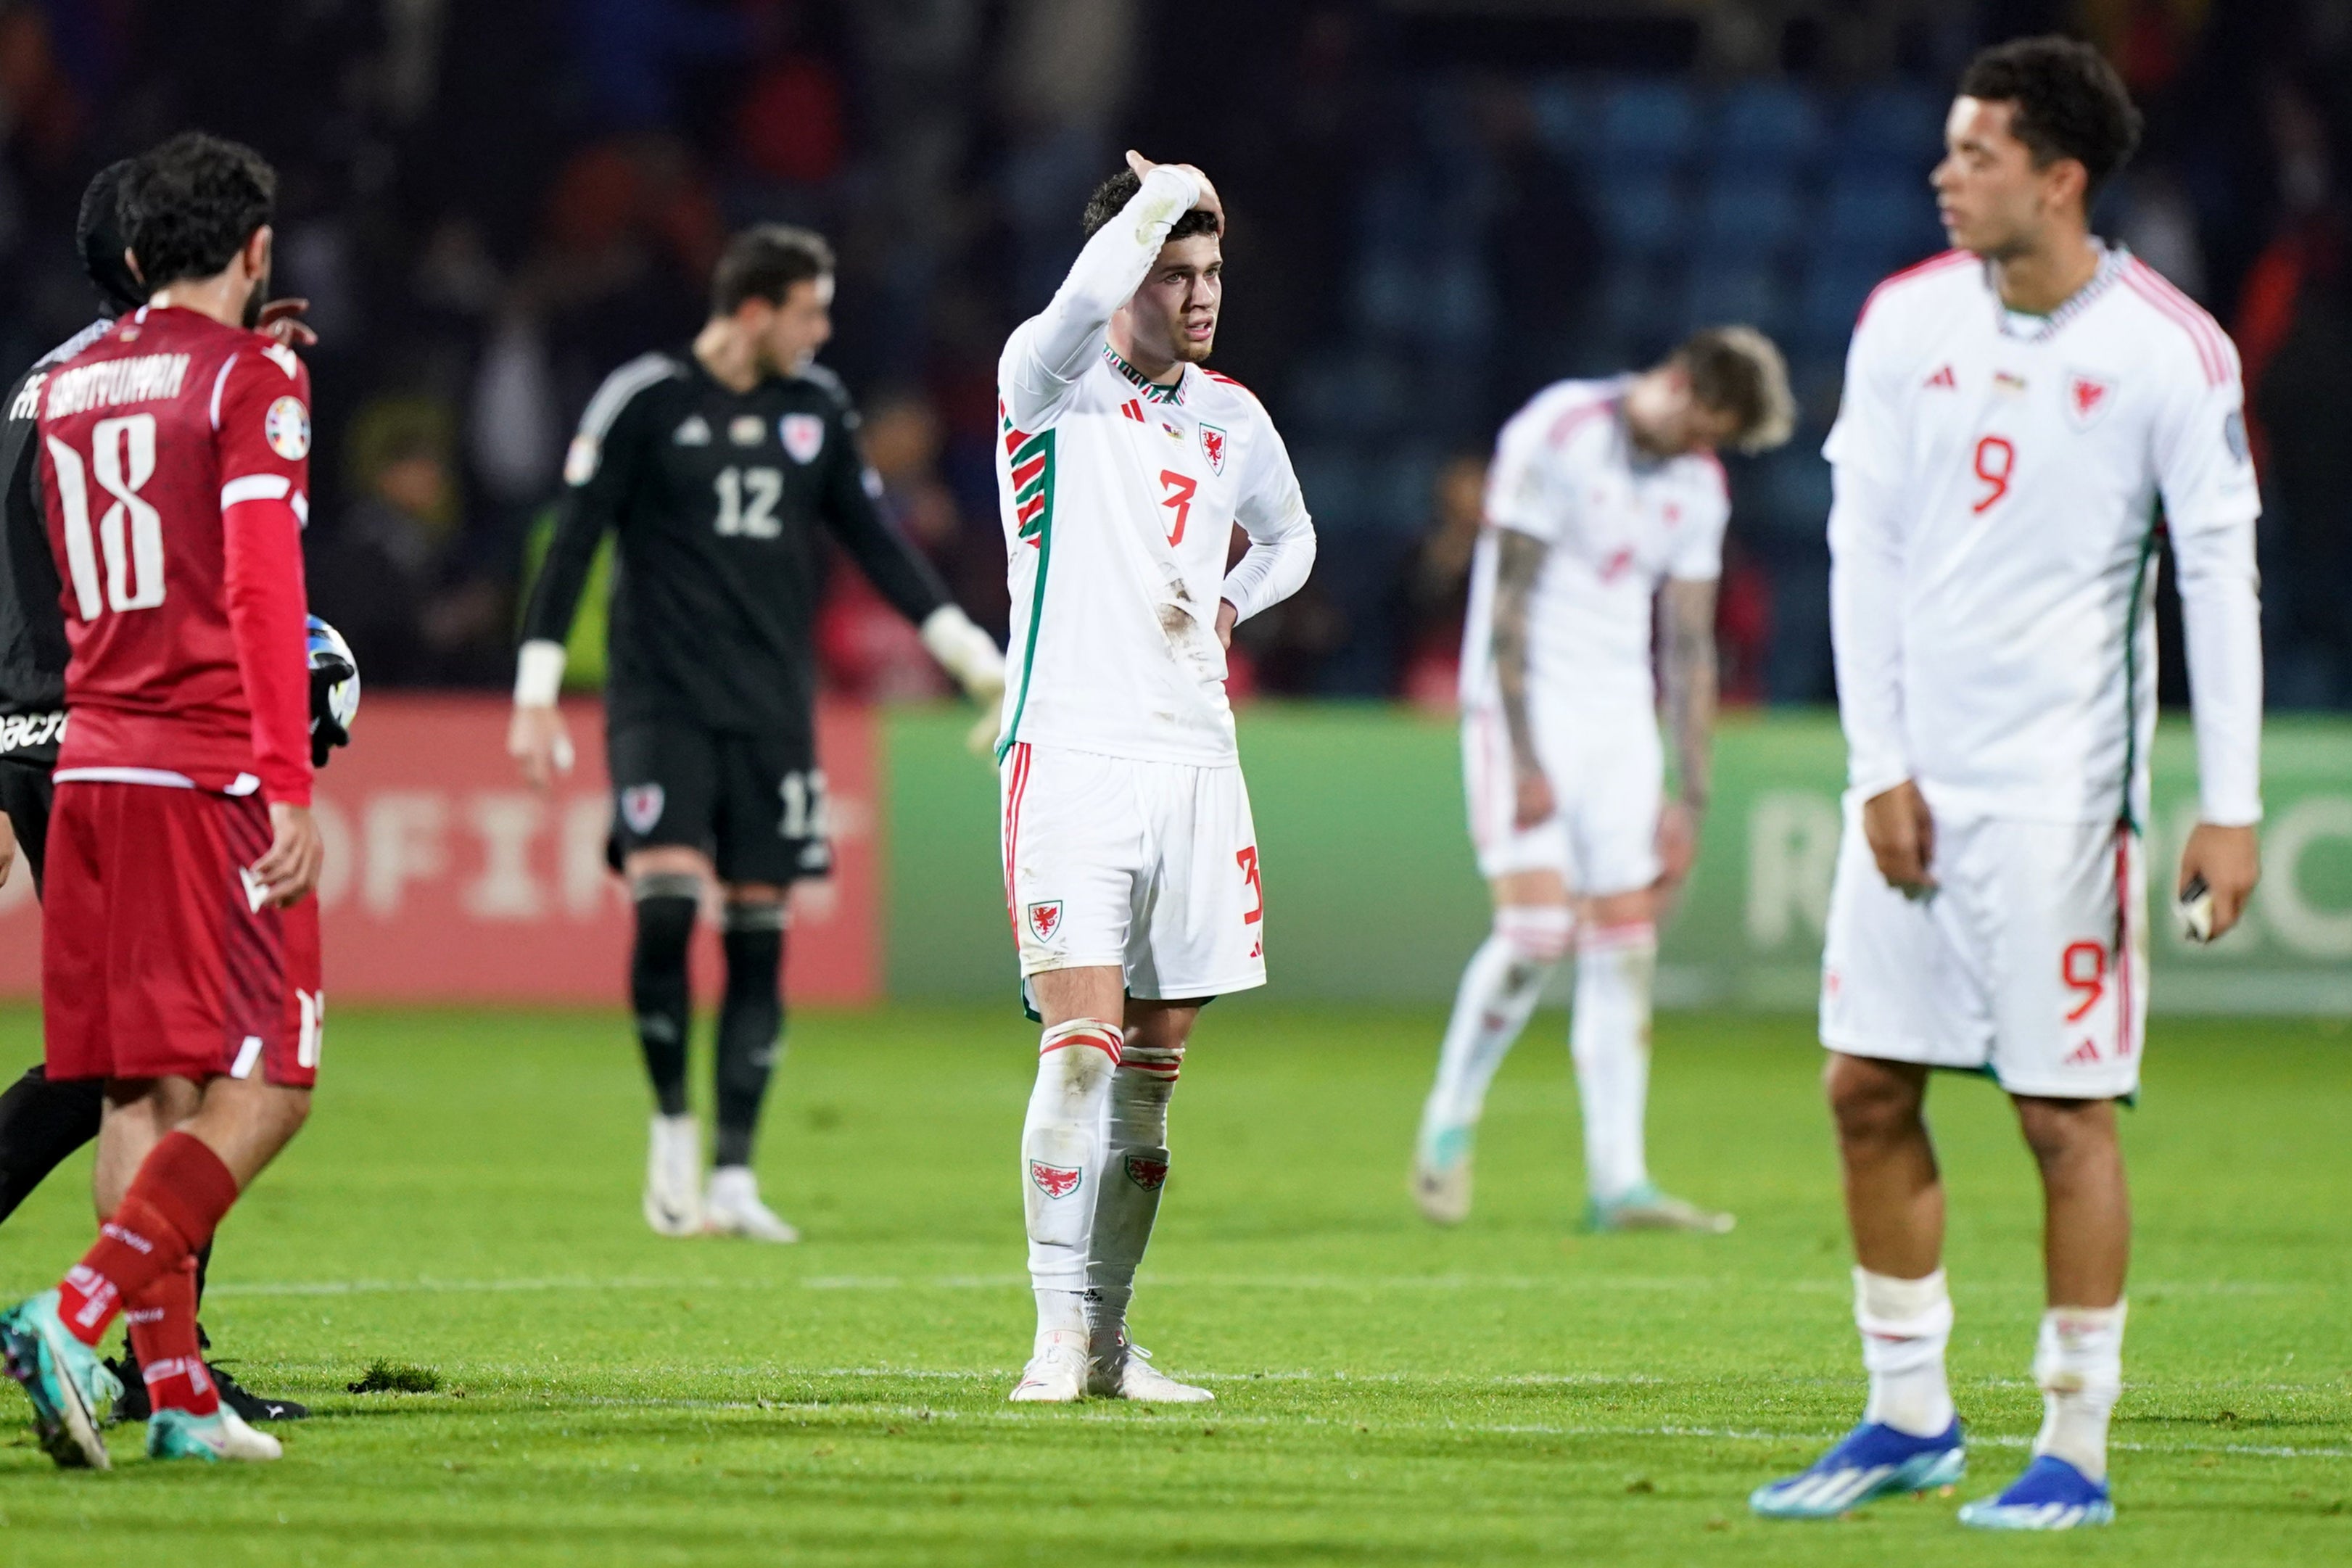 Wales saw Euro 2024 qutomatic qualification taken out of their hands in Armenia